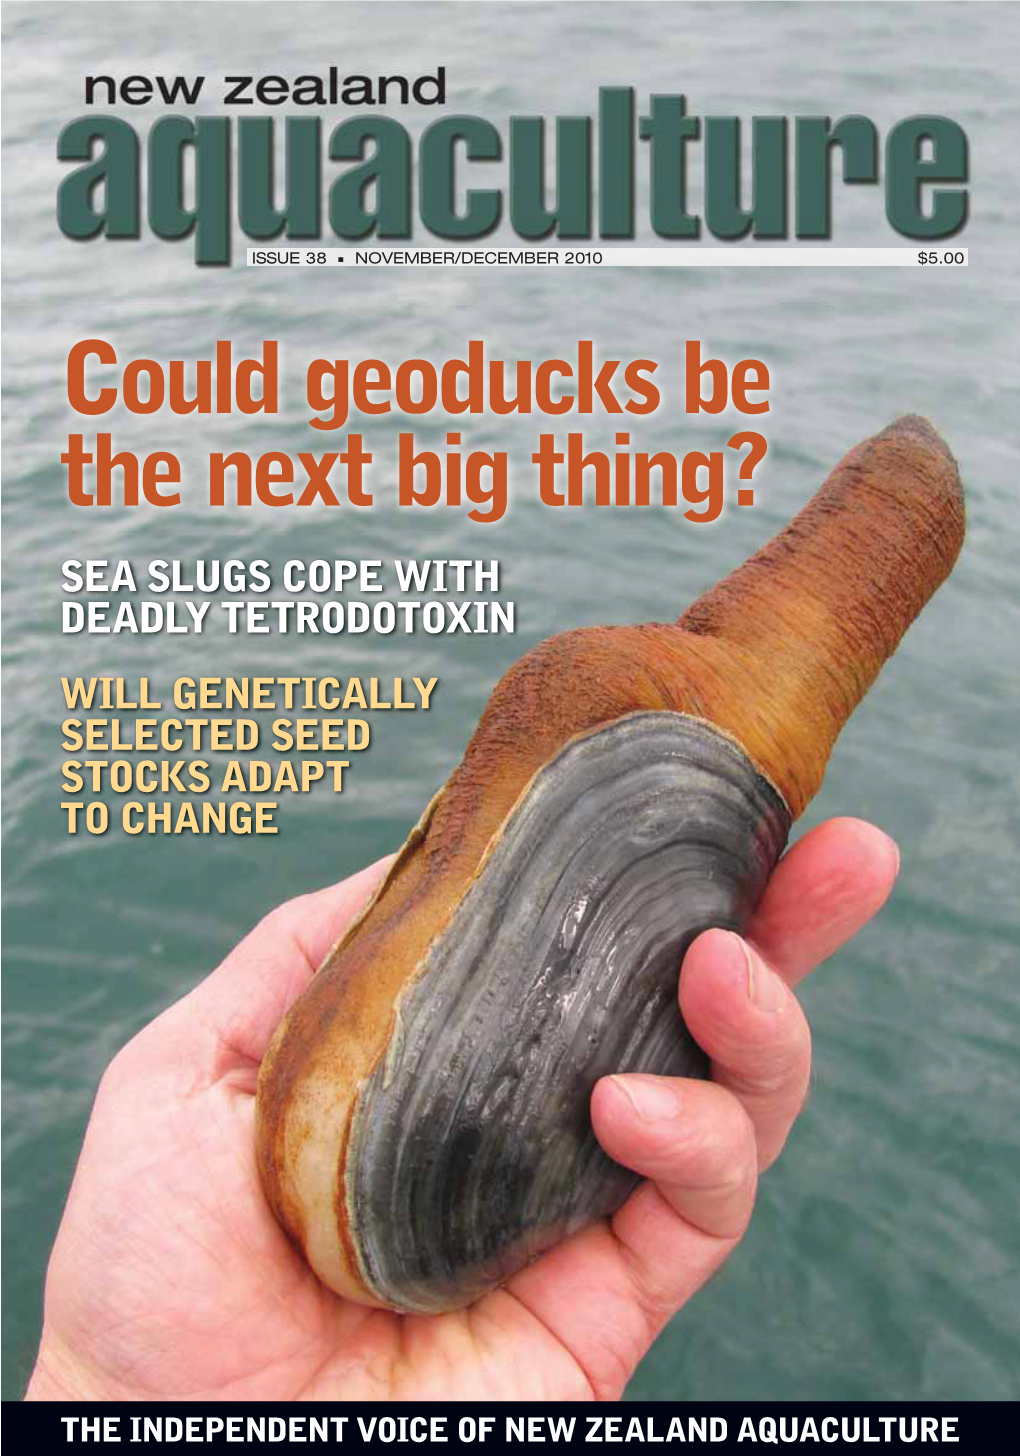 Could Geoducks Be the Next Big Thing? SEA SLUGS COPE with DEADLY TETRODOTOXIN WILL GENETICALLY SELECTED SEED STOCKS ADAPT to CHANGE